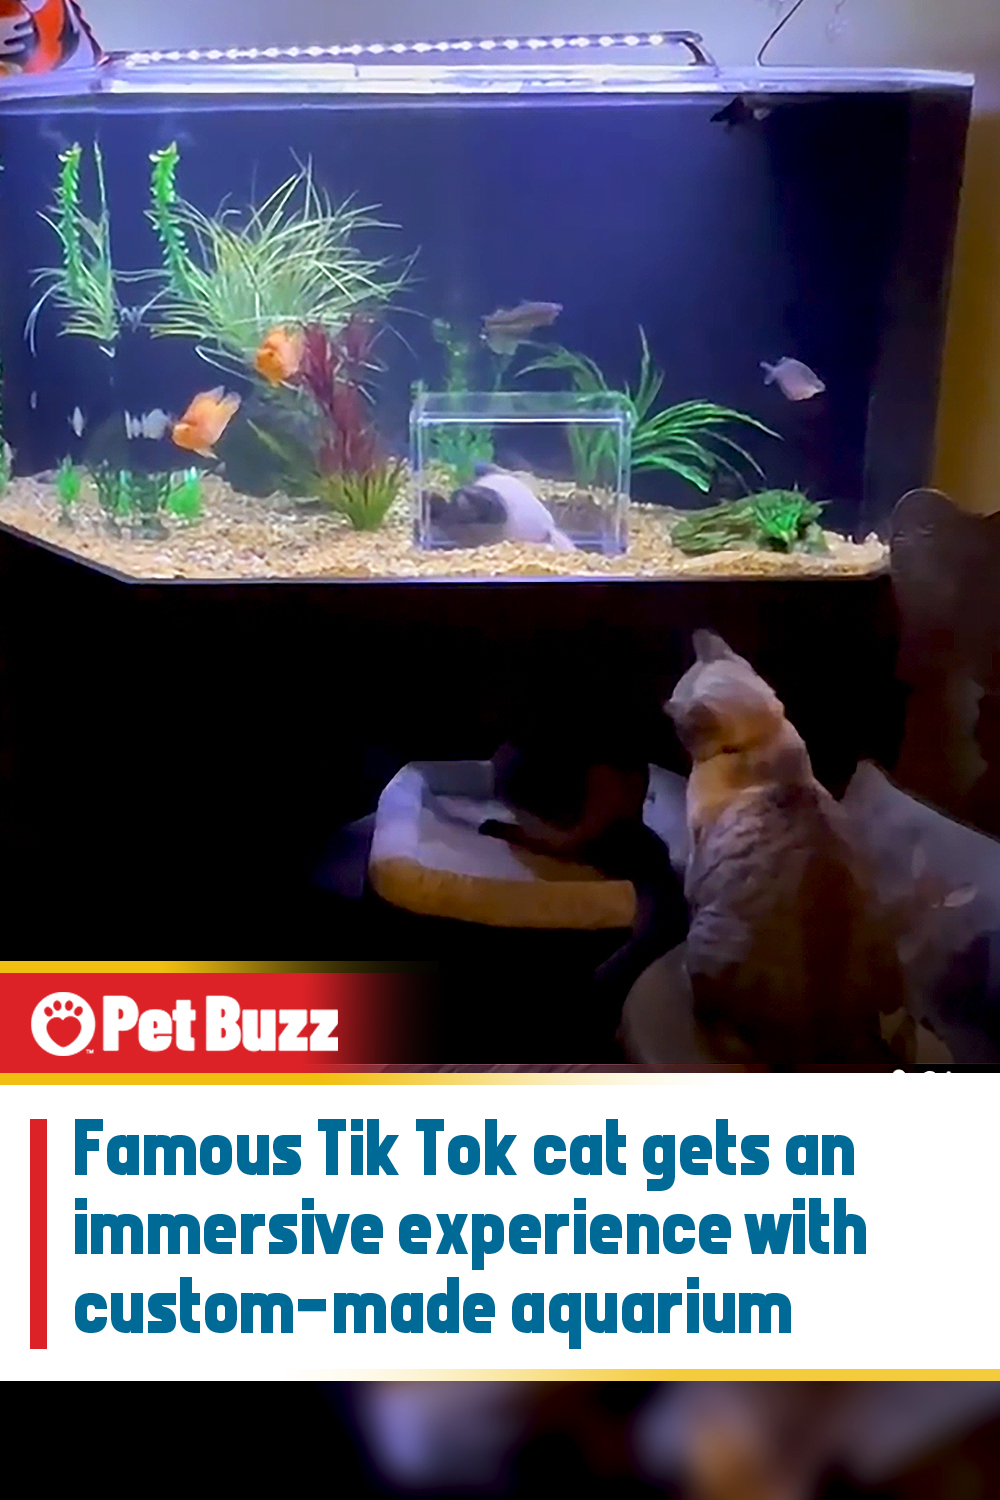 Famous Tik Tok cat gets an immersive experience with custom-made aquarium